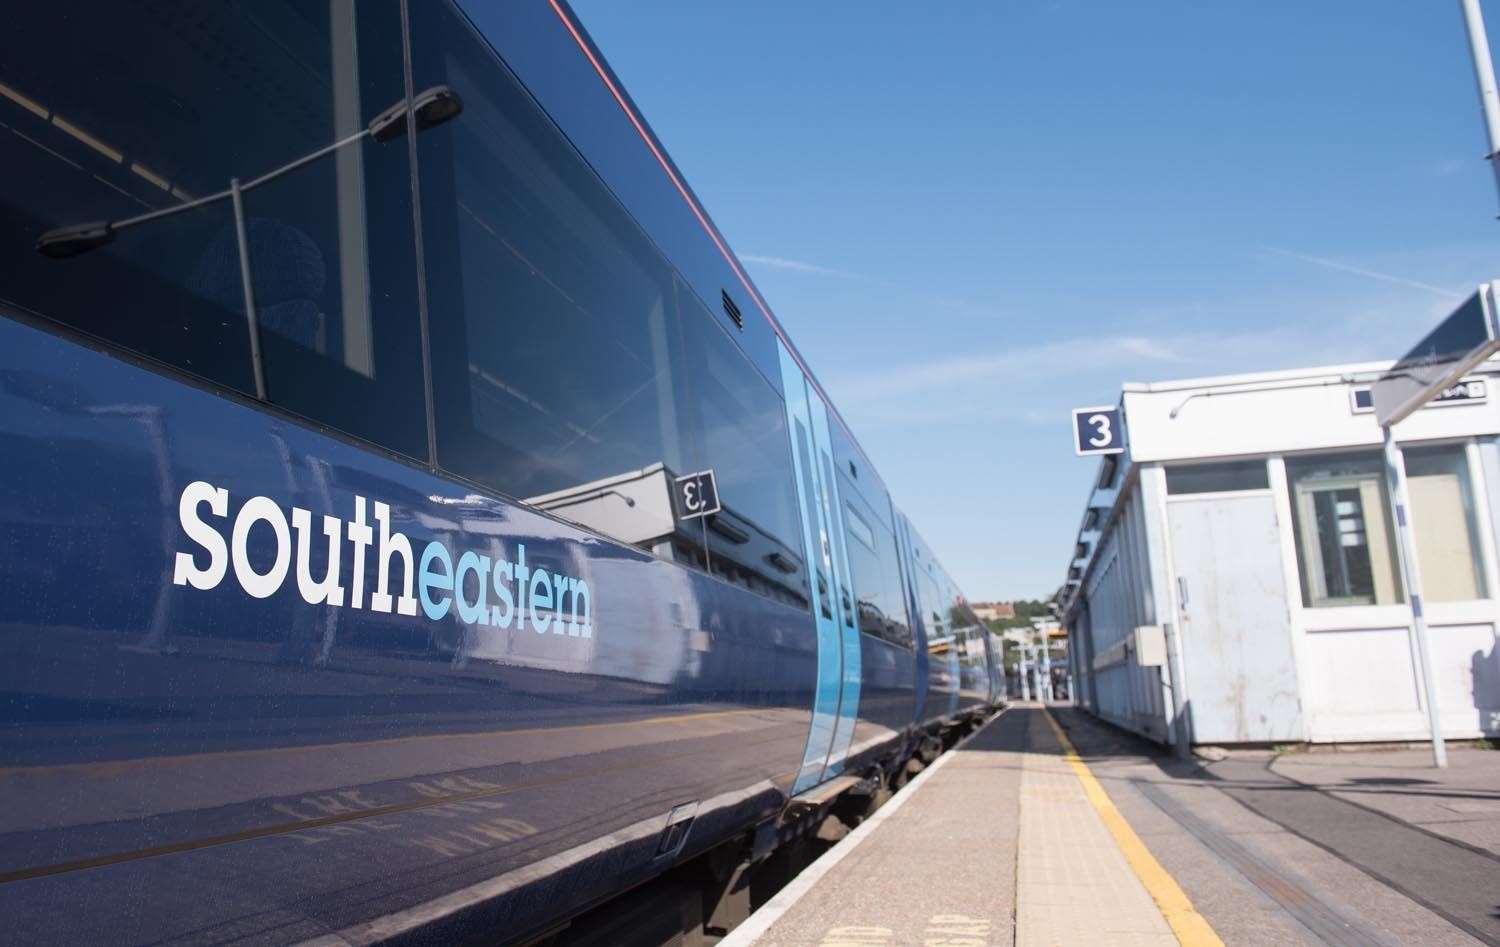 Southeastern services were disrupted this evening